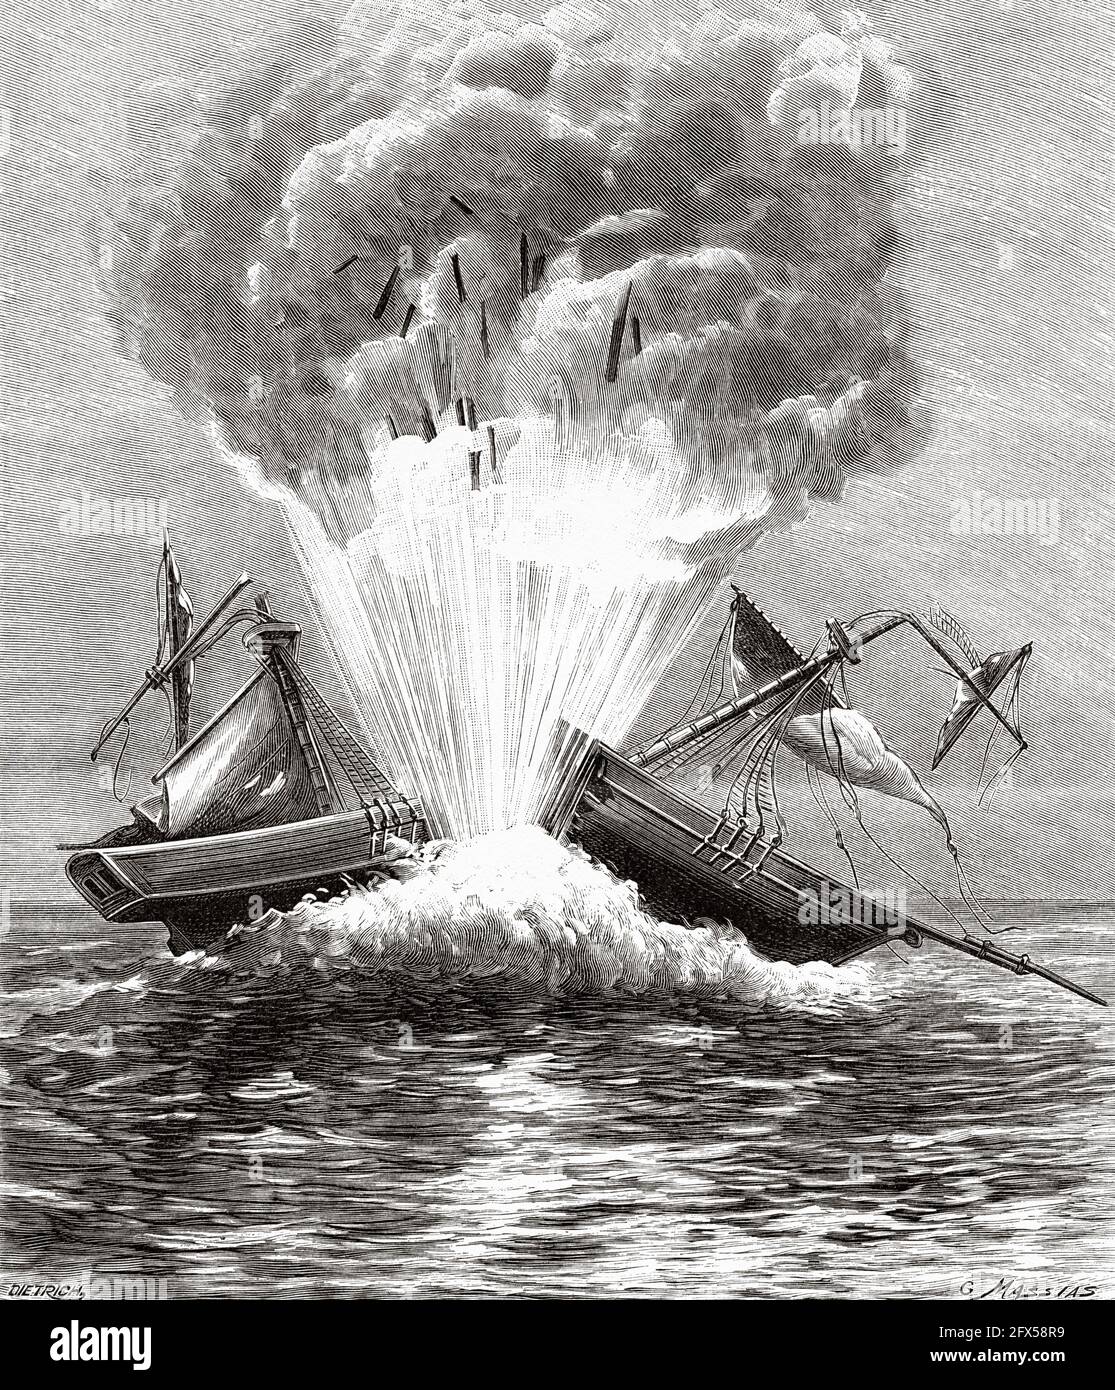 Fulton blows La Dorothee boat with his infernal machine in the harbor of Brest on October 15, 1805. France, Europe. Old 19th century engraved illustration from La Nature 1893 Stock Photo